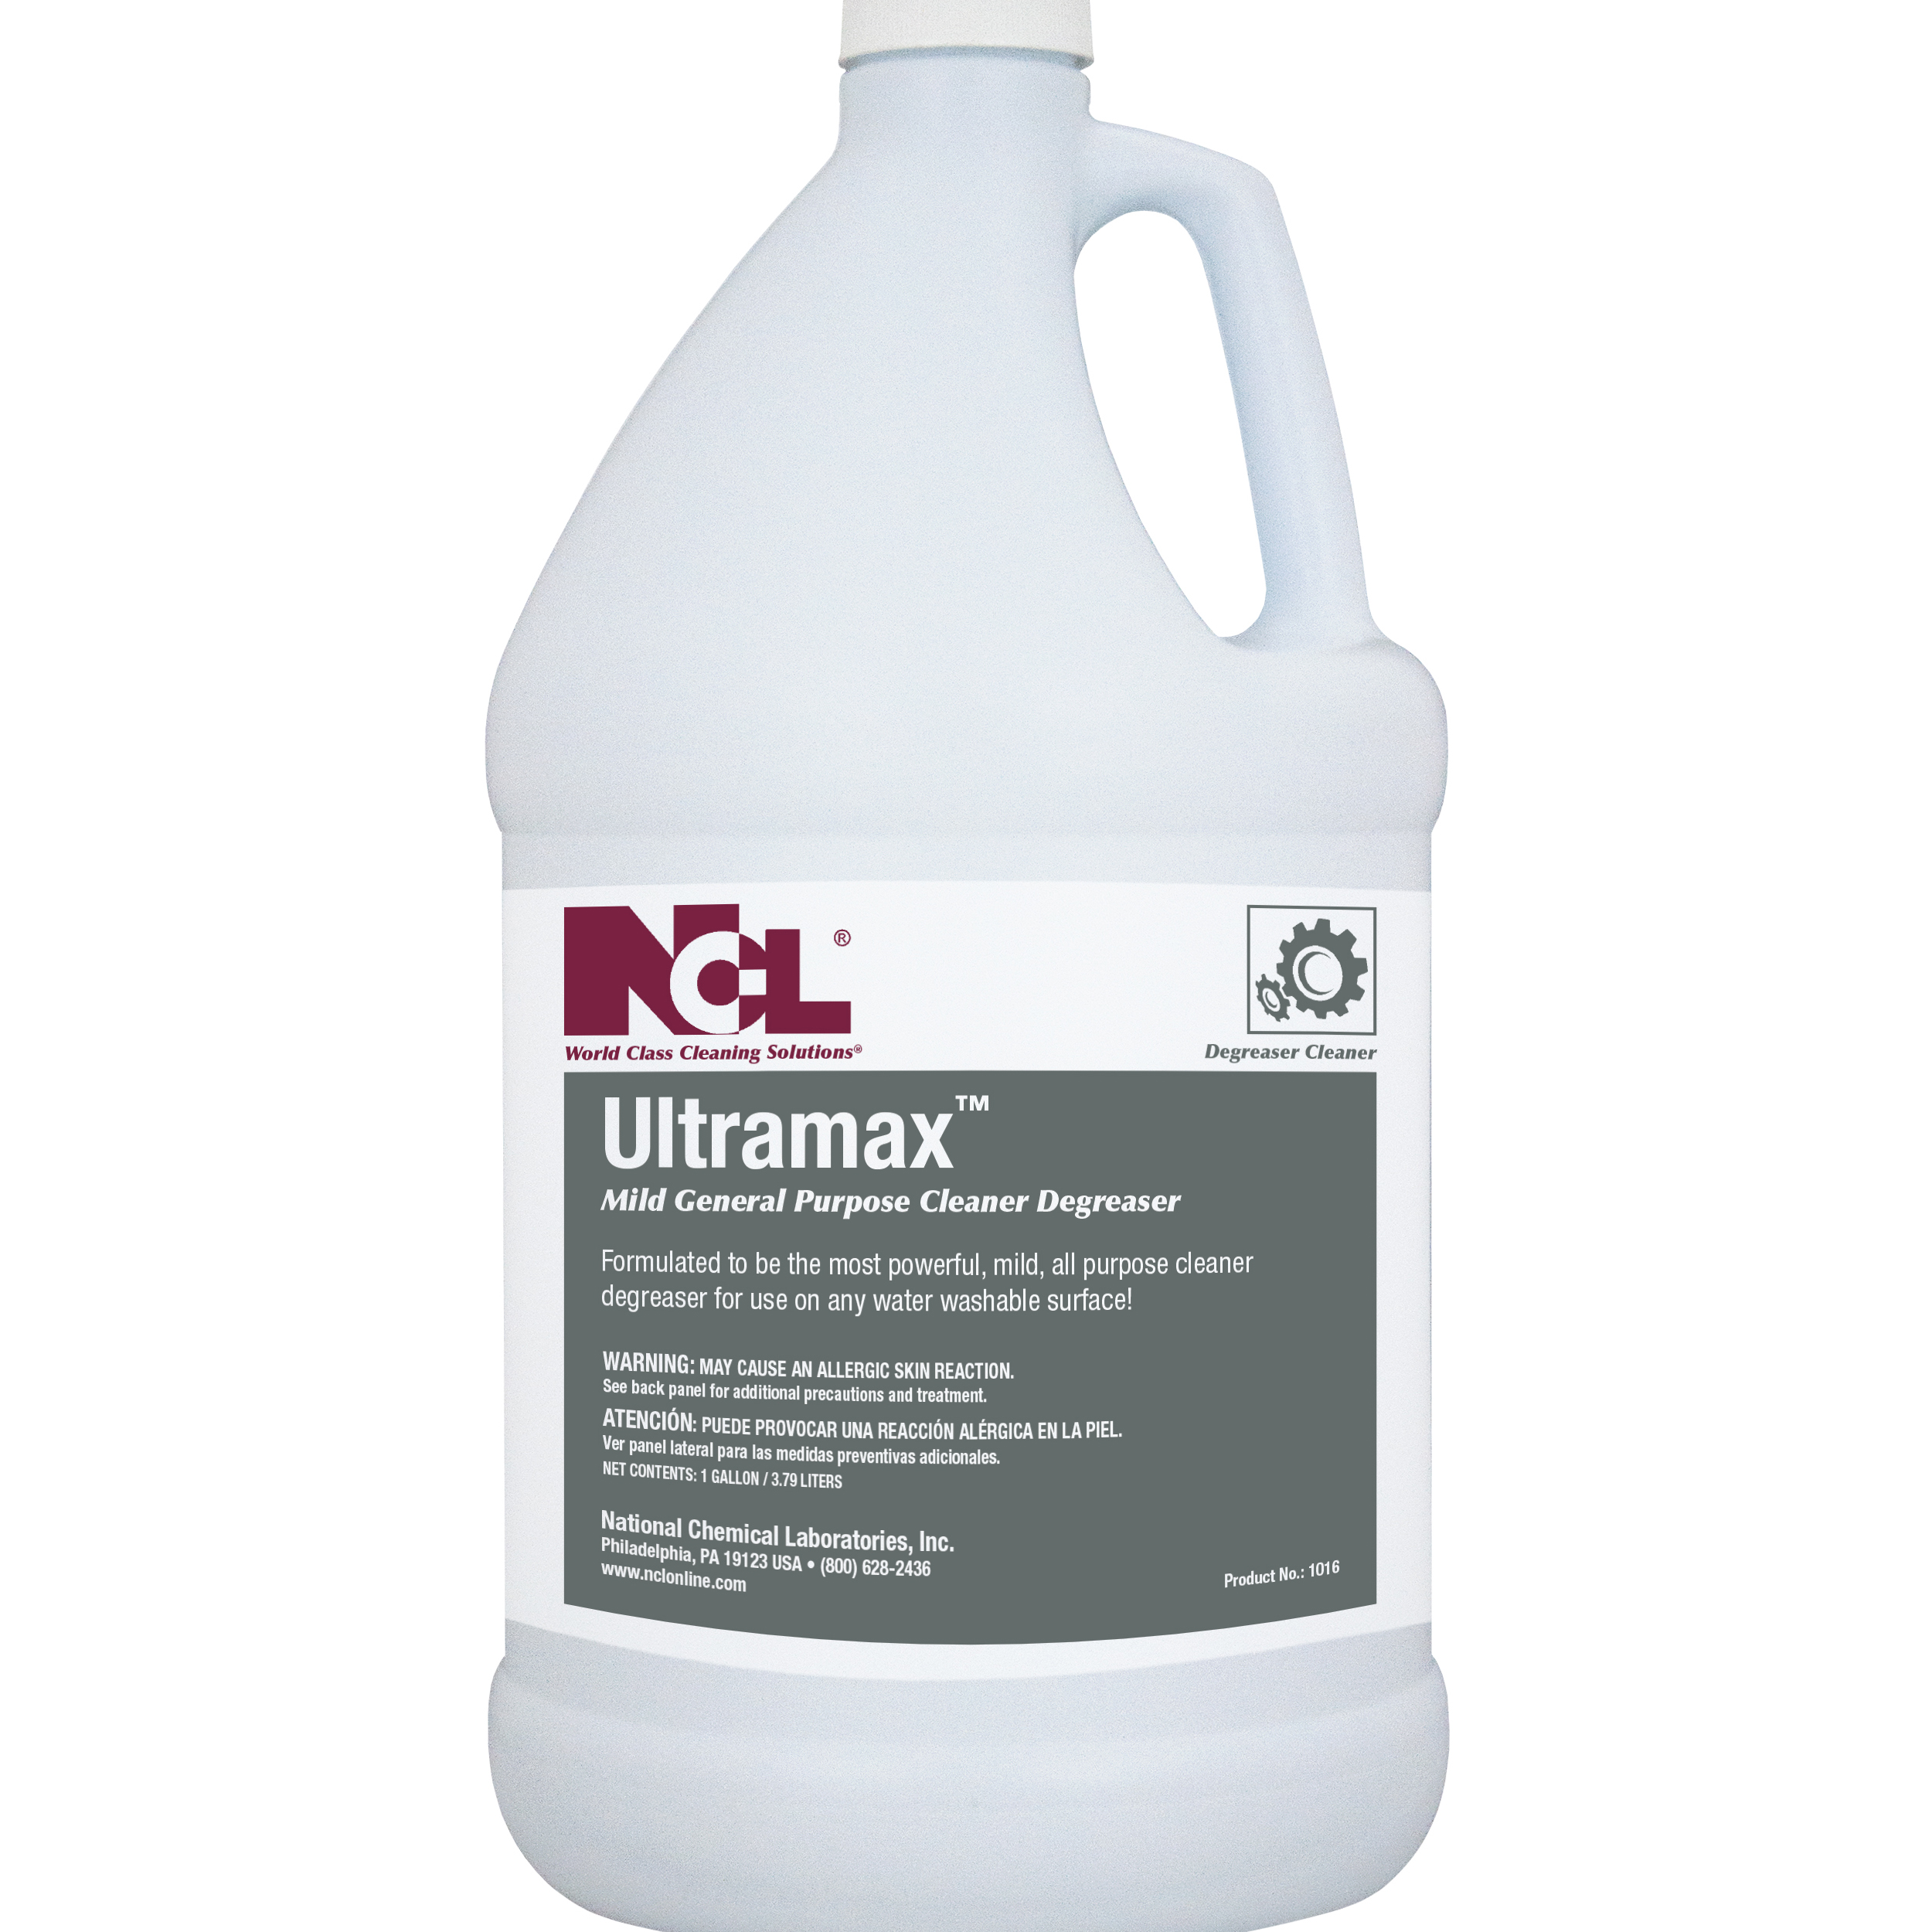  ULTRAMAX Neutral General Purpose Degreaser Cleaner 4/1 Gal. Case (NCL1016-29) 